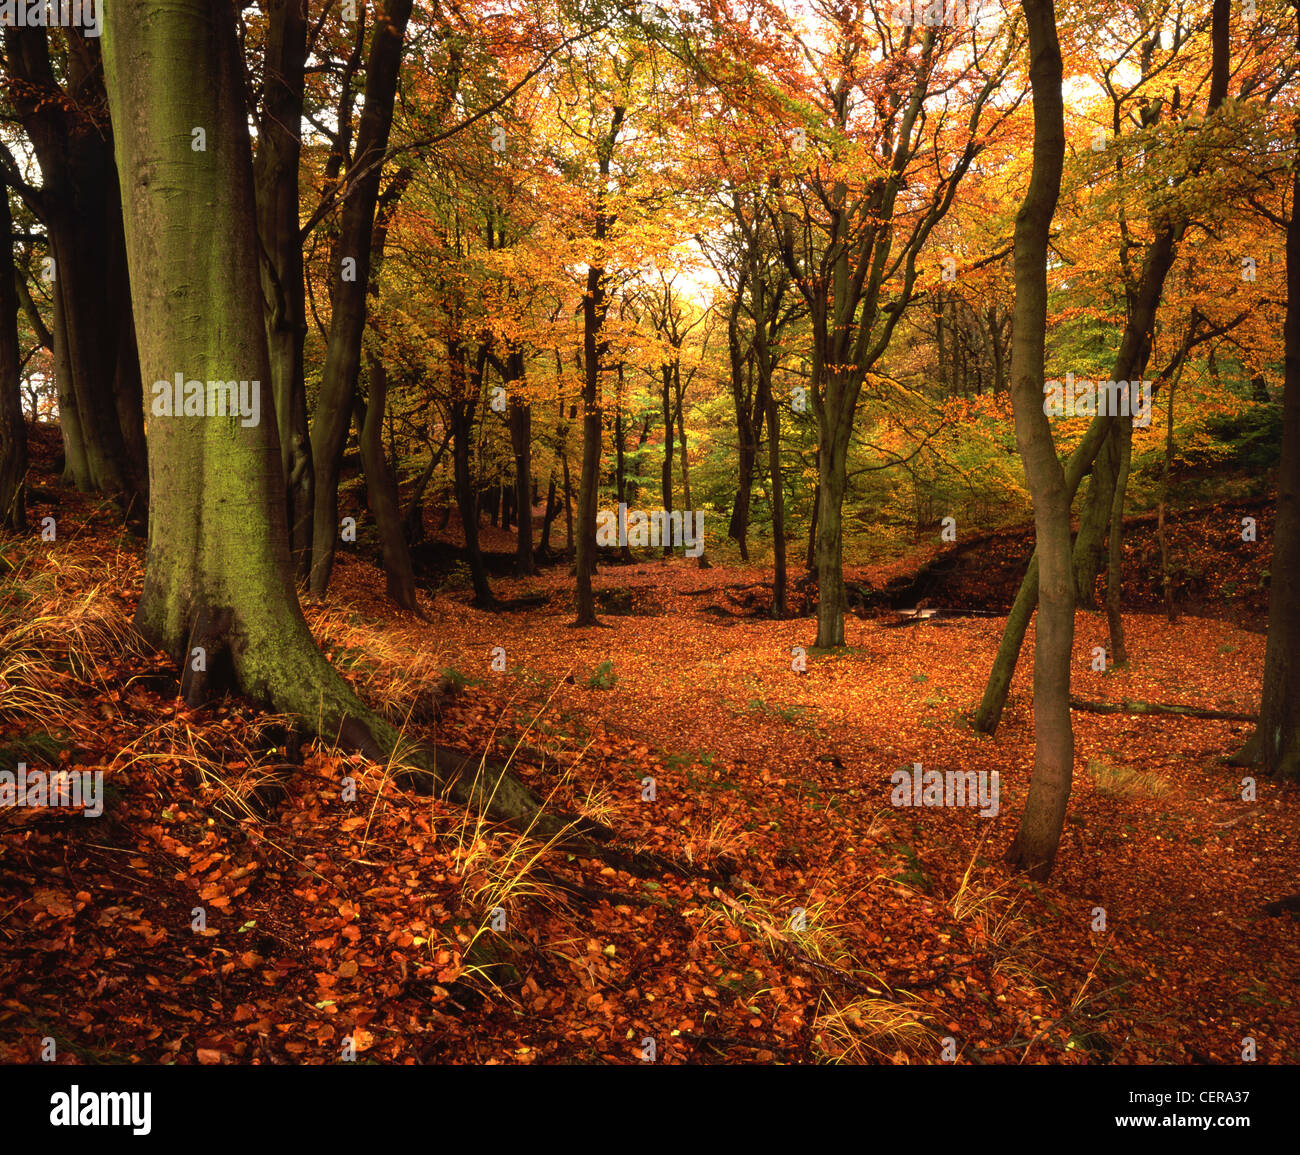 Roddlesworth Woods near Darwen. It is one of the best stretches of woodland in Lancashire. Stock Photo